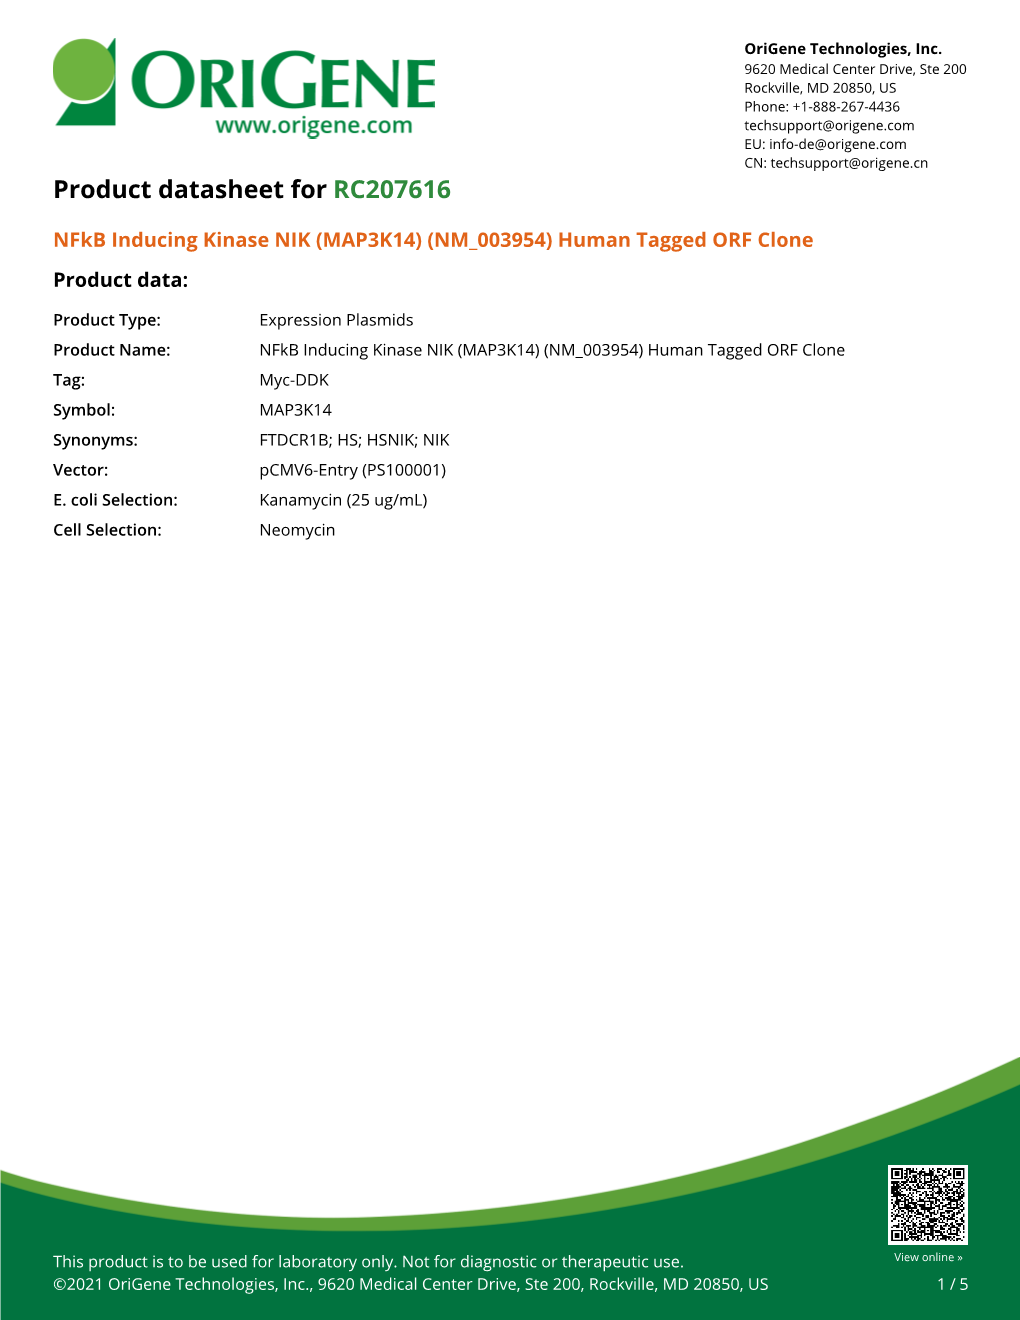 (MAP3K14) (NM 003954) Human Tagged ORF Clone Product Data